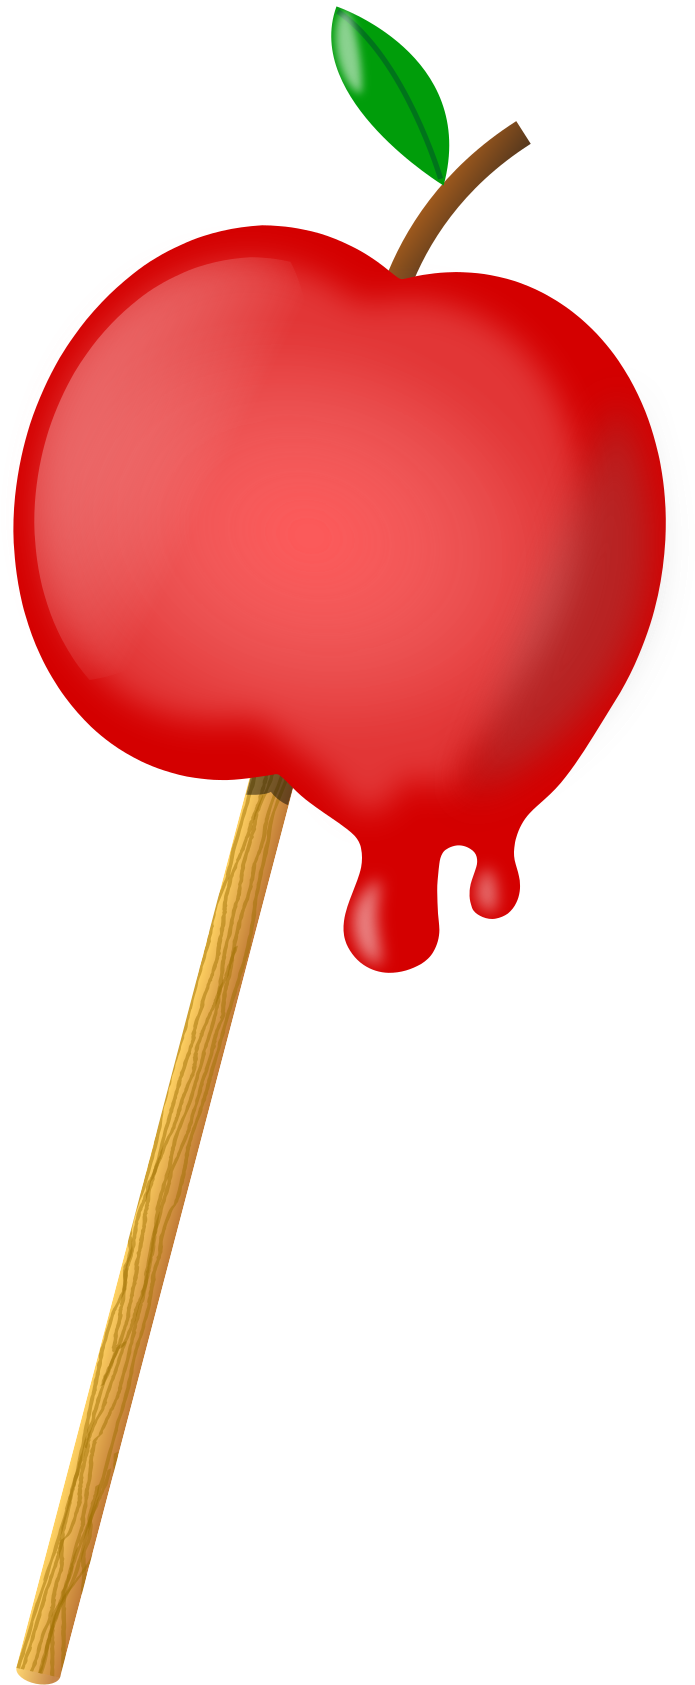 Coated Apple - Candy Apple Clipart (1697x2400)